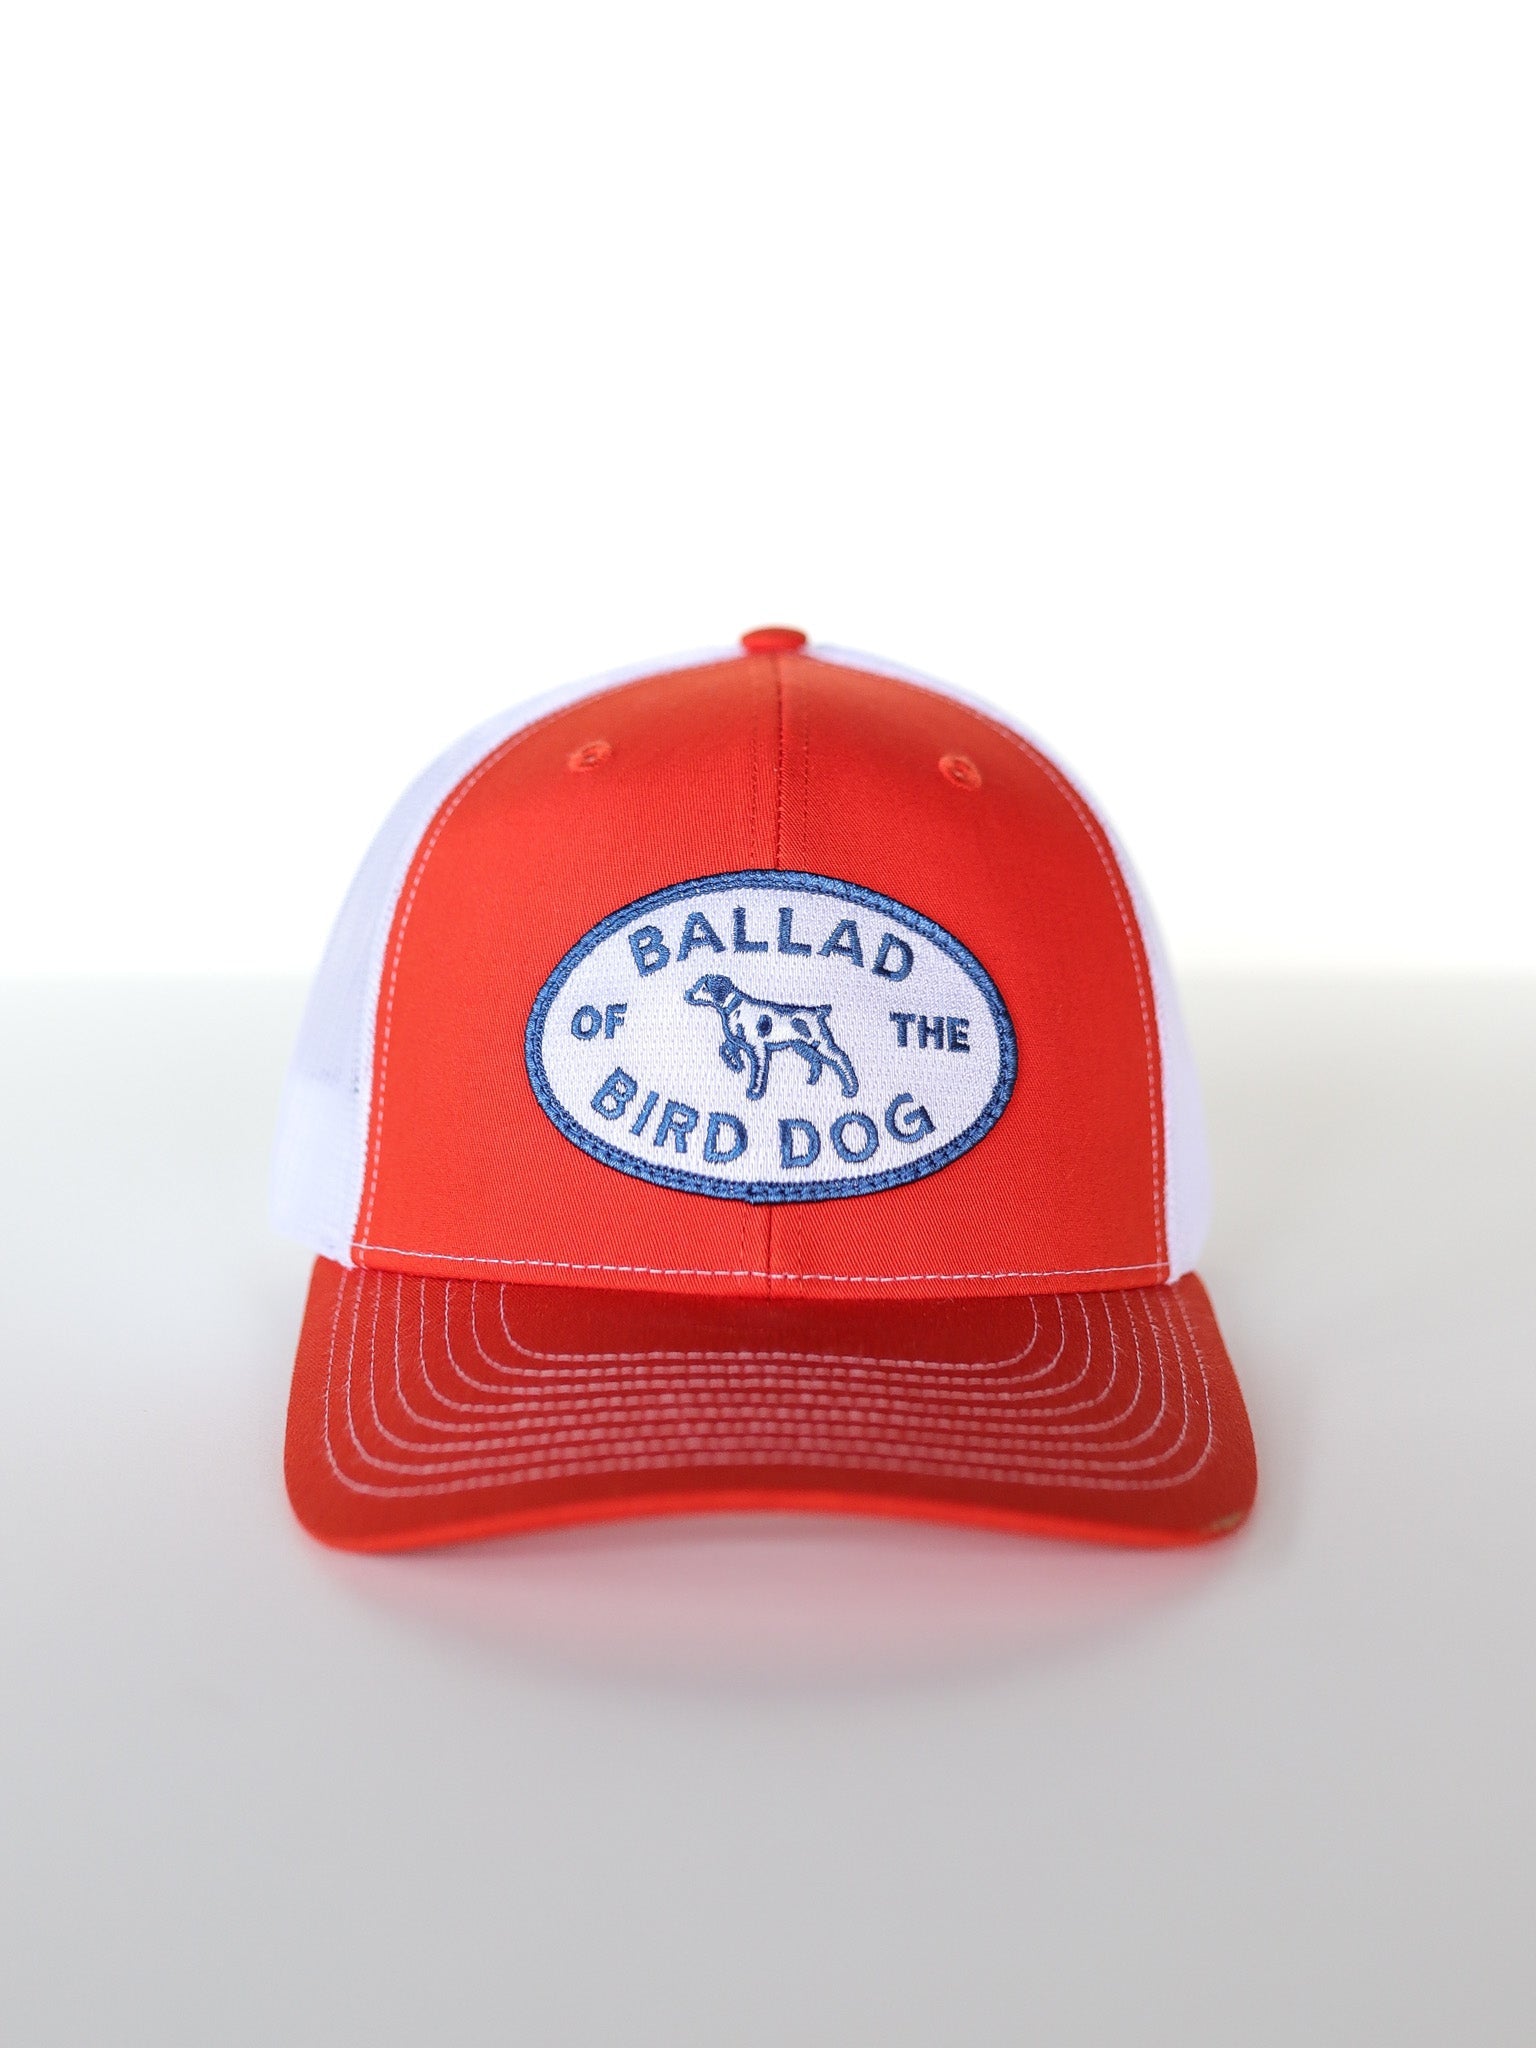 Shop Hat | Upland Patch Ballad Of The Bird Dog - Oval